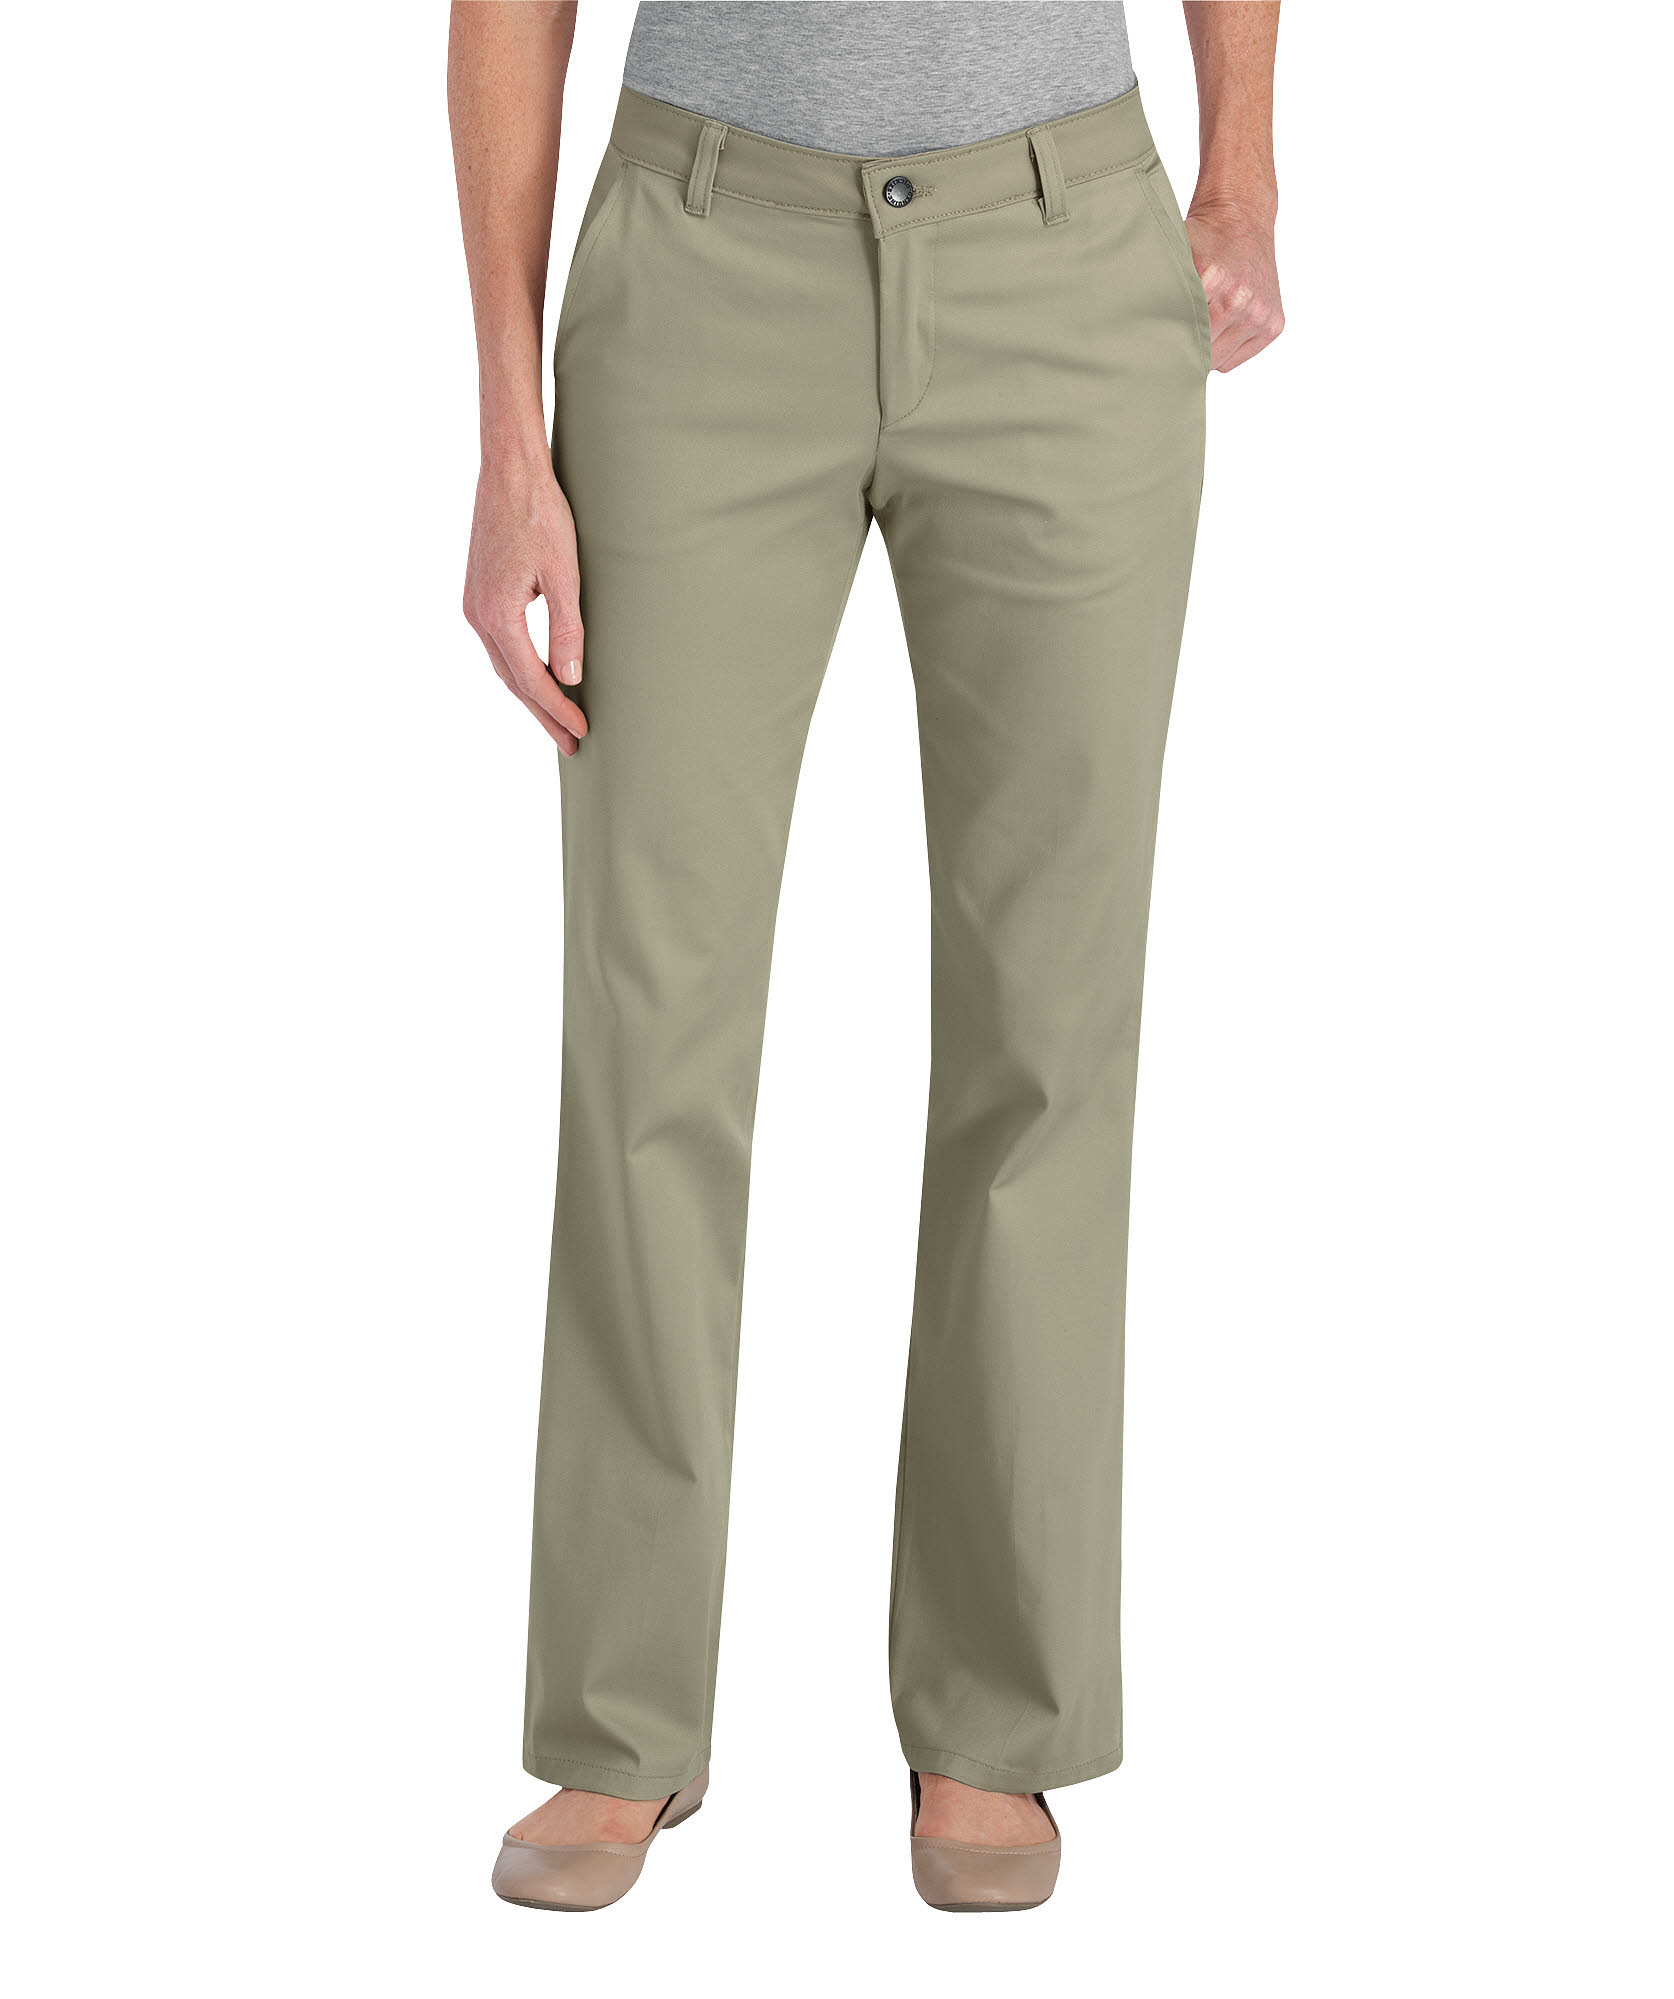 Genuine Dickies Womens Pants Archives - Corporate Cleaners & Laundry